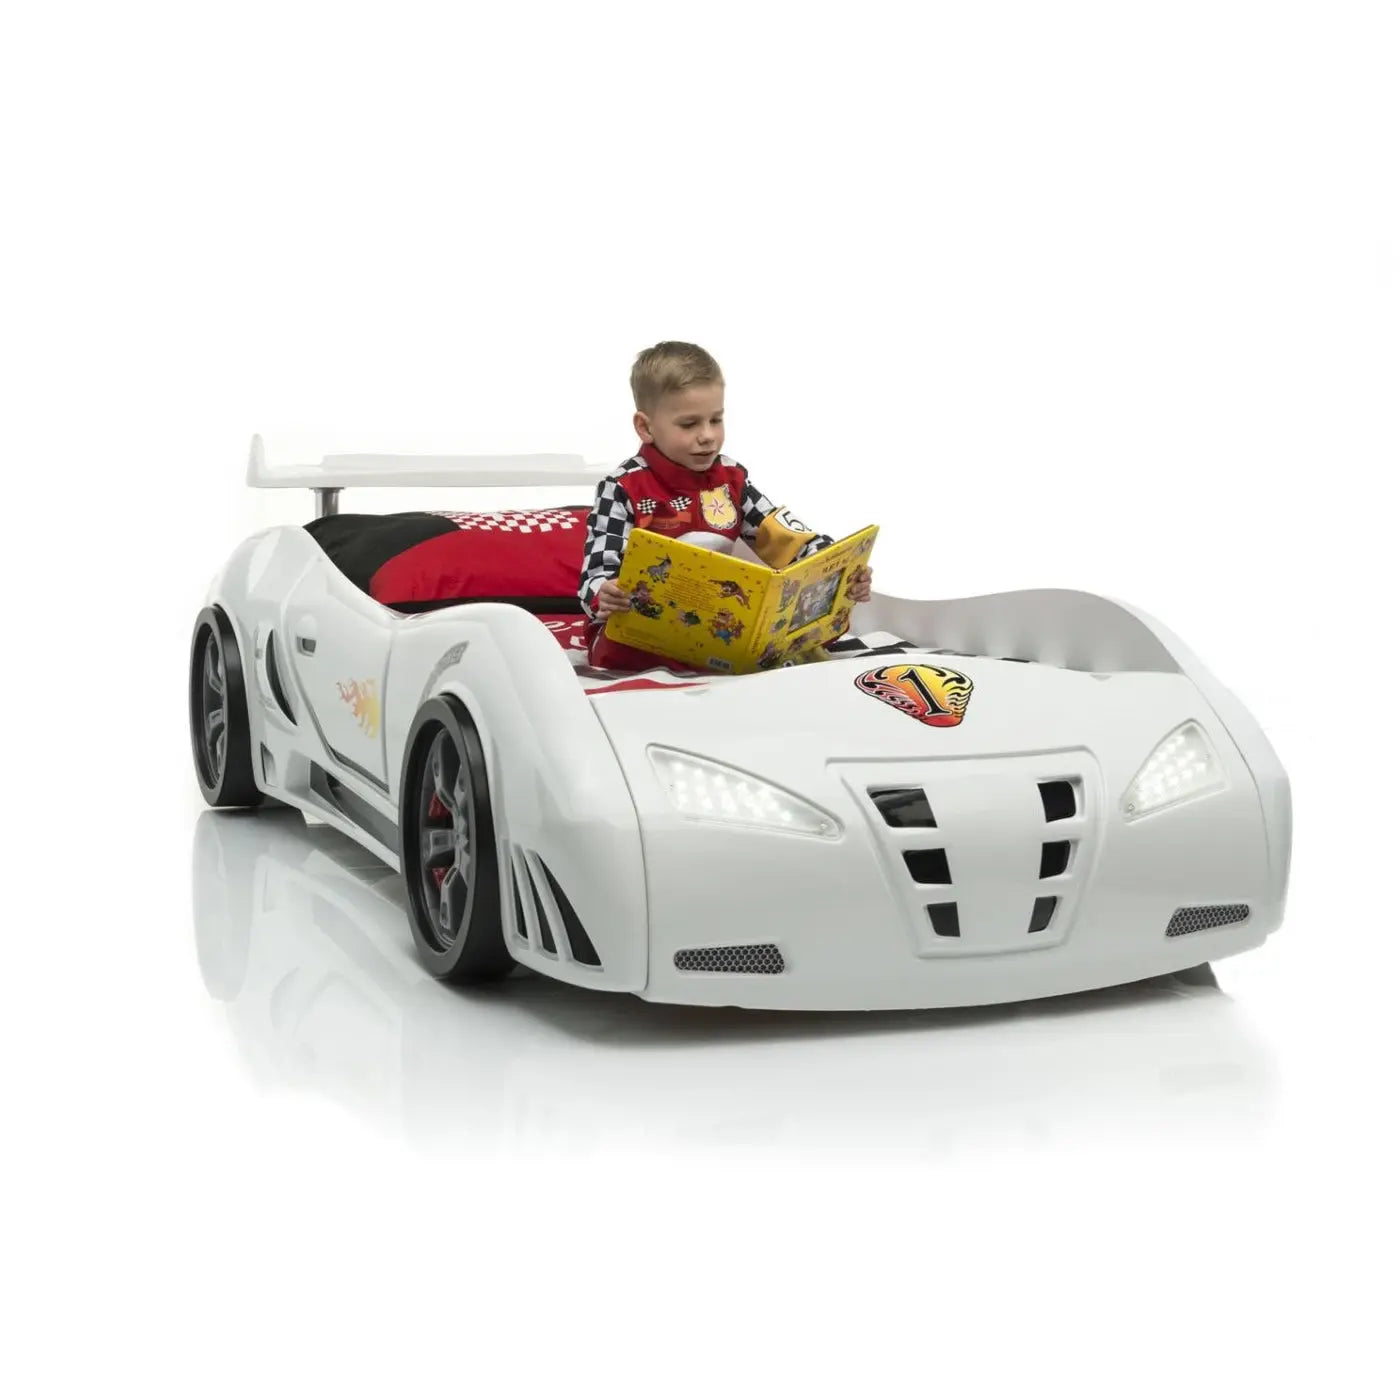 files/M3-Infiniti-Race-Car-Bed-for-Kids-w-LEDs_-Sound-effects-and-Free-Mattress-CaKidsRoom-1686084319_1400x1400_2322c3ea-11e9-4816-a9bd-6e8f60b78a77.webp